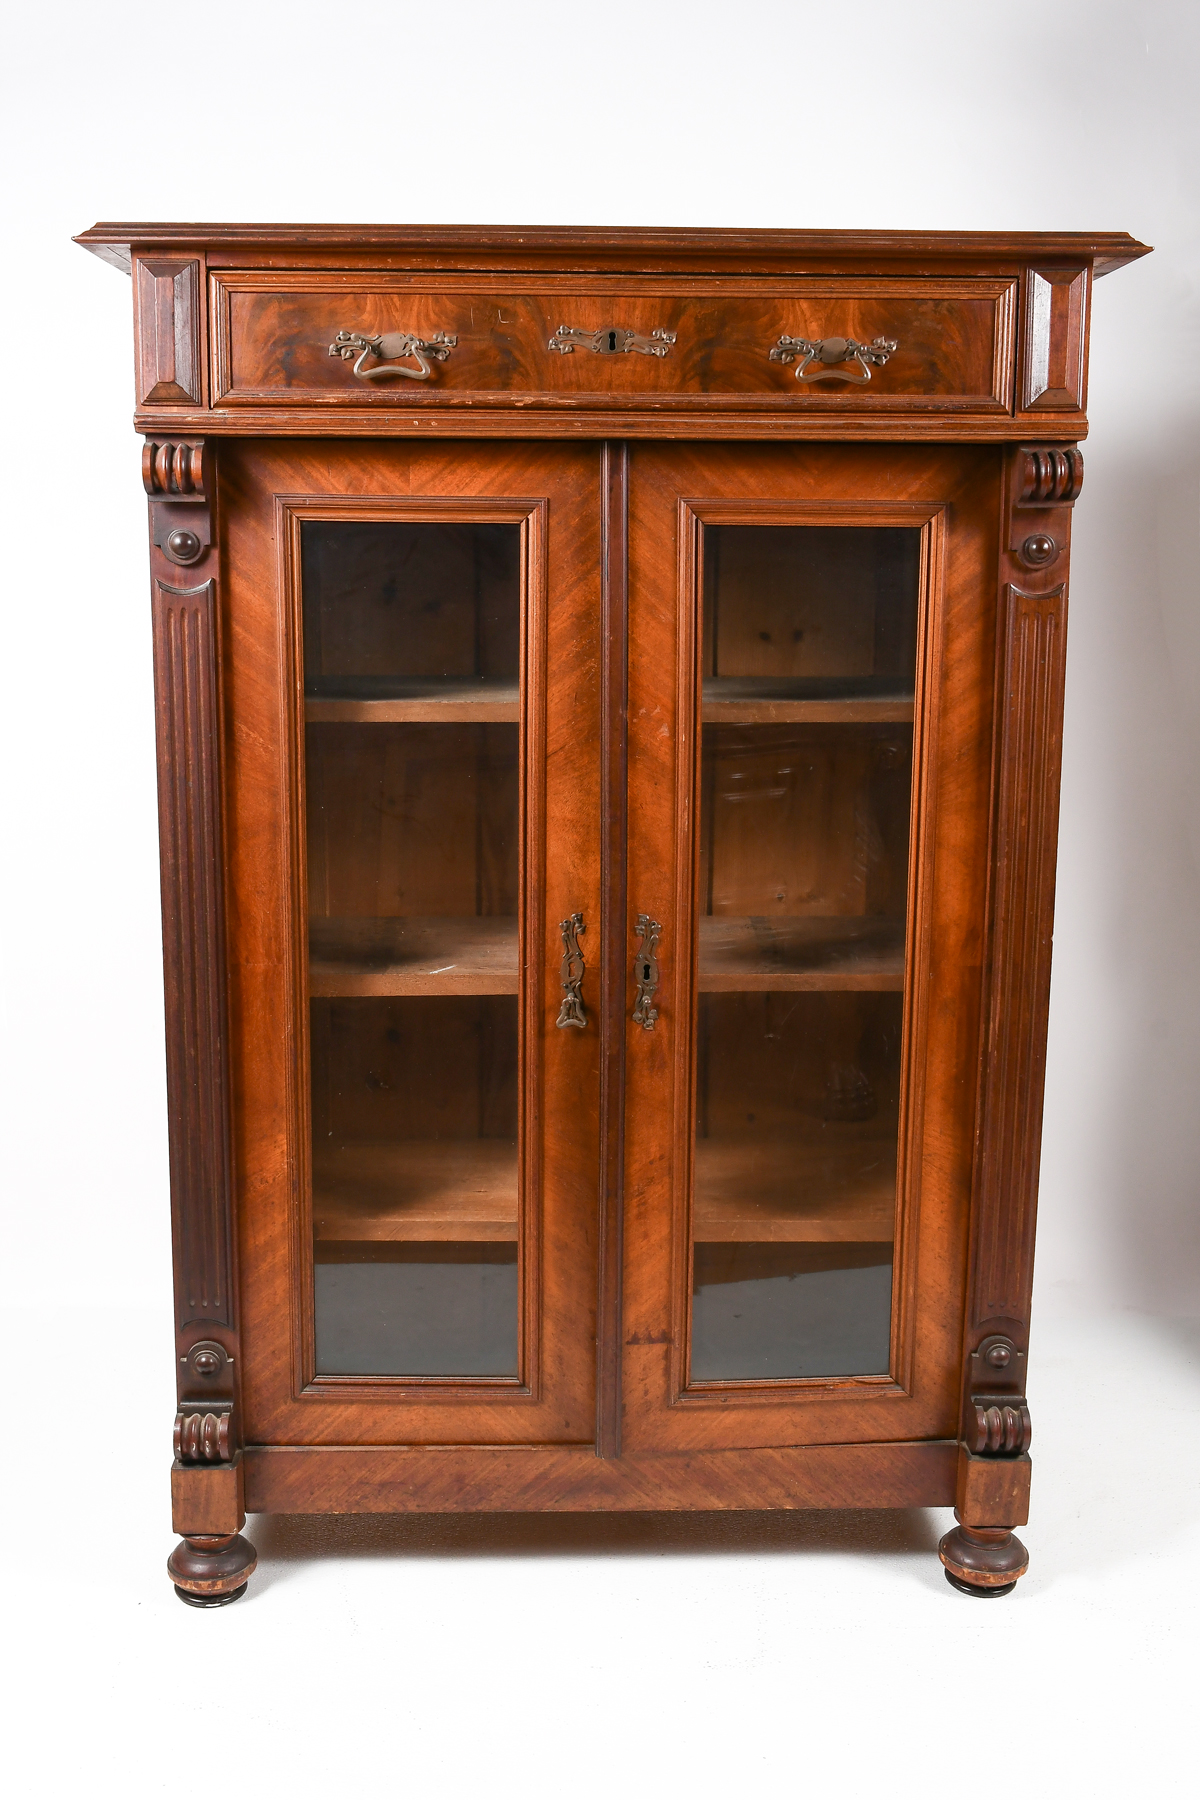 MAHOGANY AND SATINWOOD BOOKCASE: With